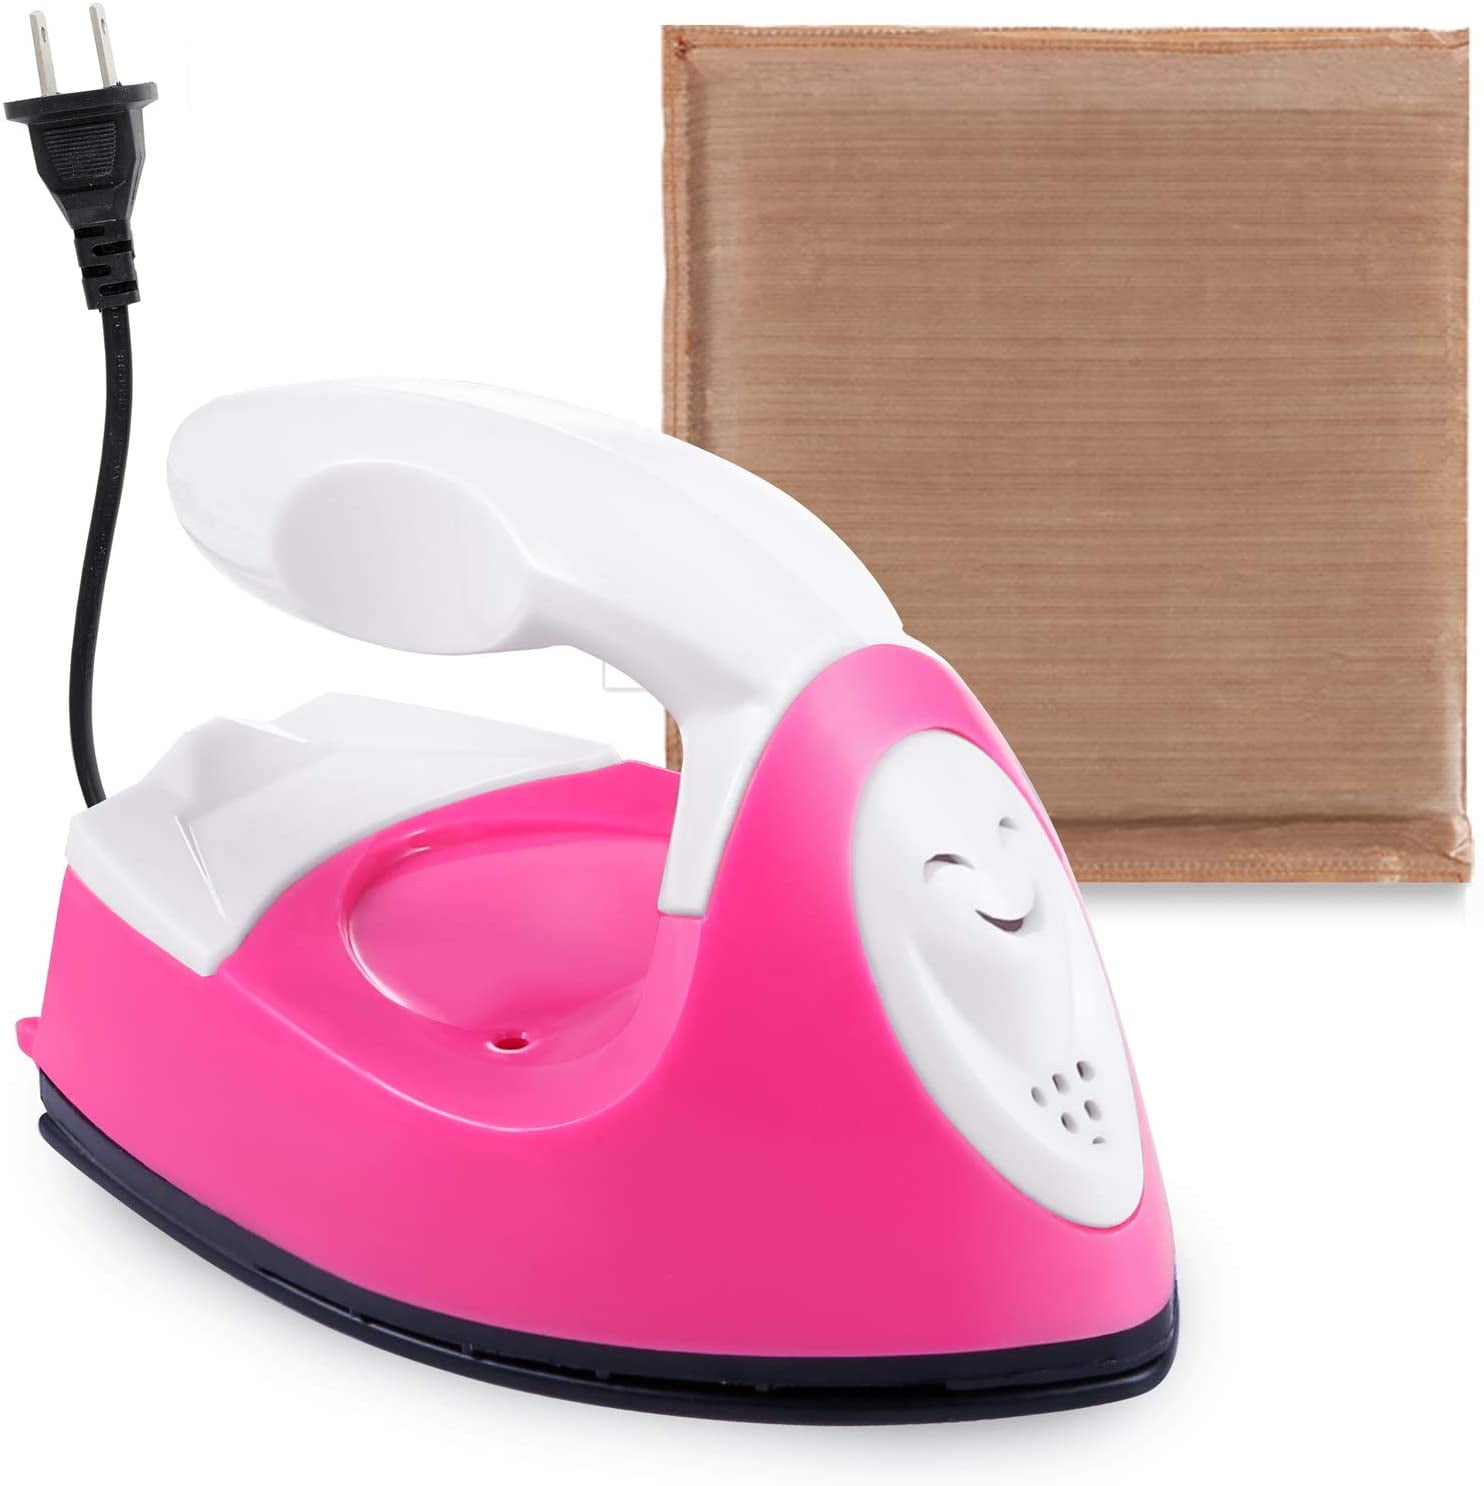 Mini Heat Press Machine Temperature Heat Press Iron Portable Handy Electric  Iron with Charging Base Accessories for Transfer Vinyl Projects Clothes 